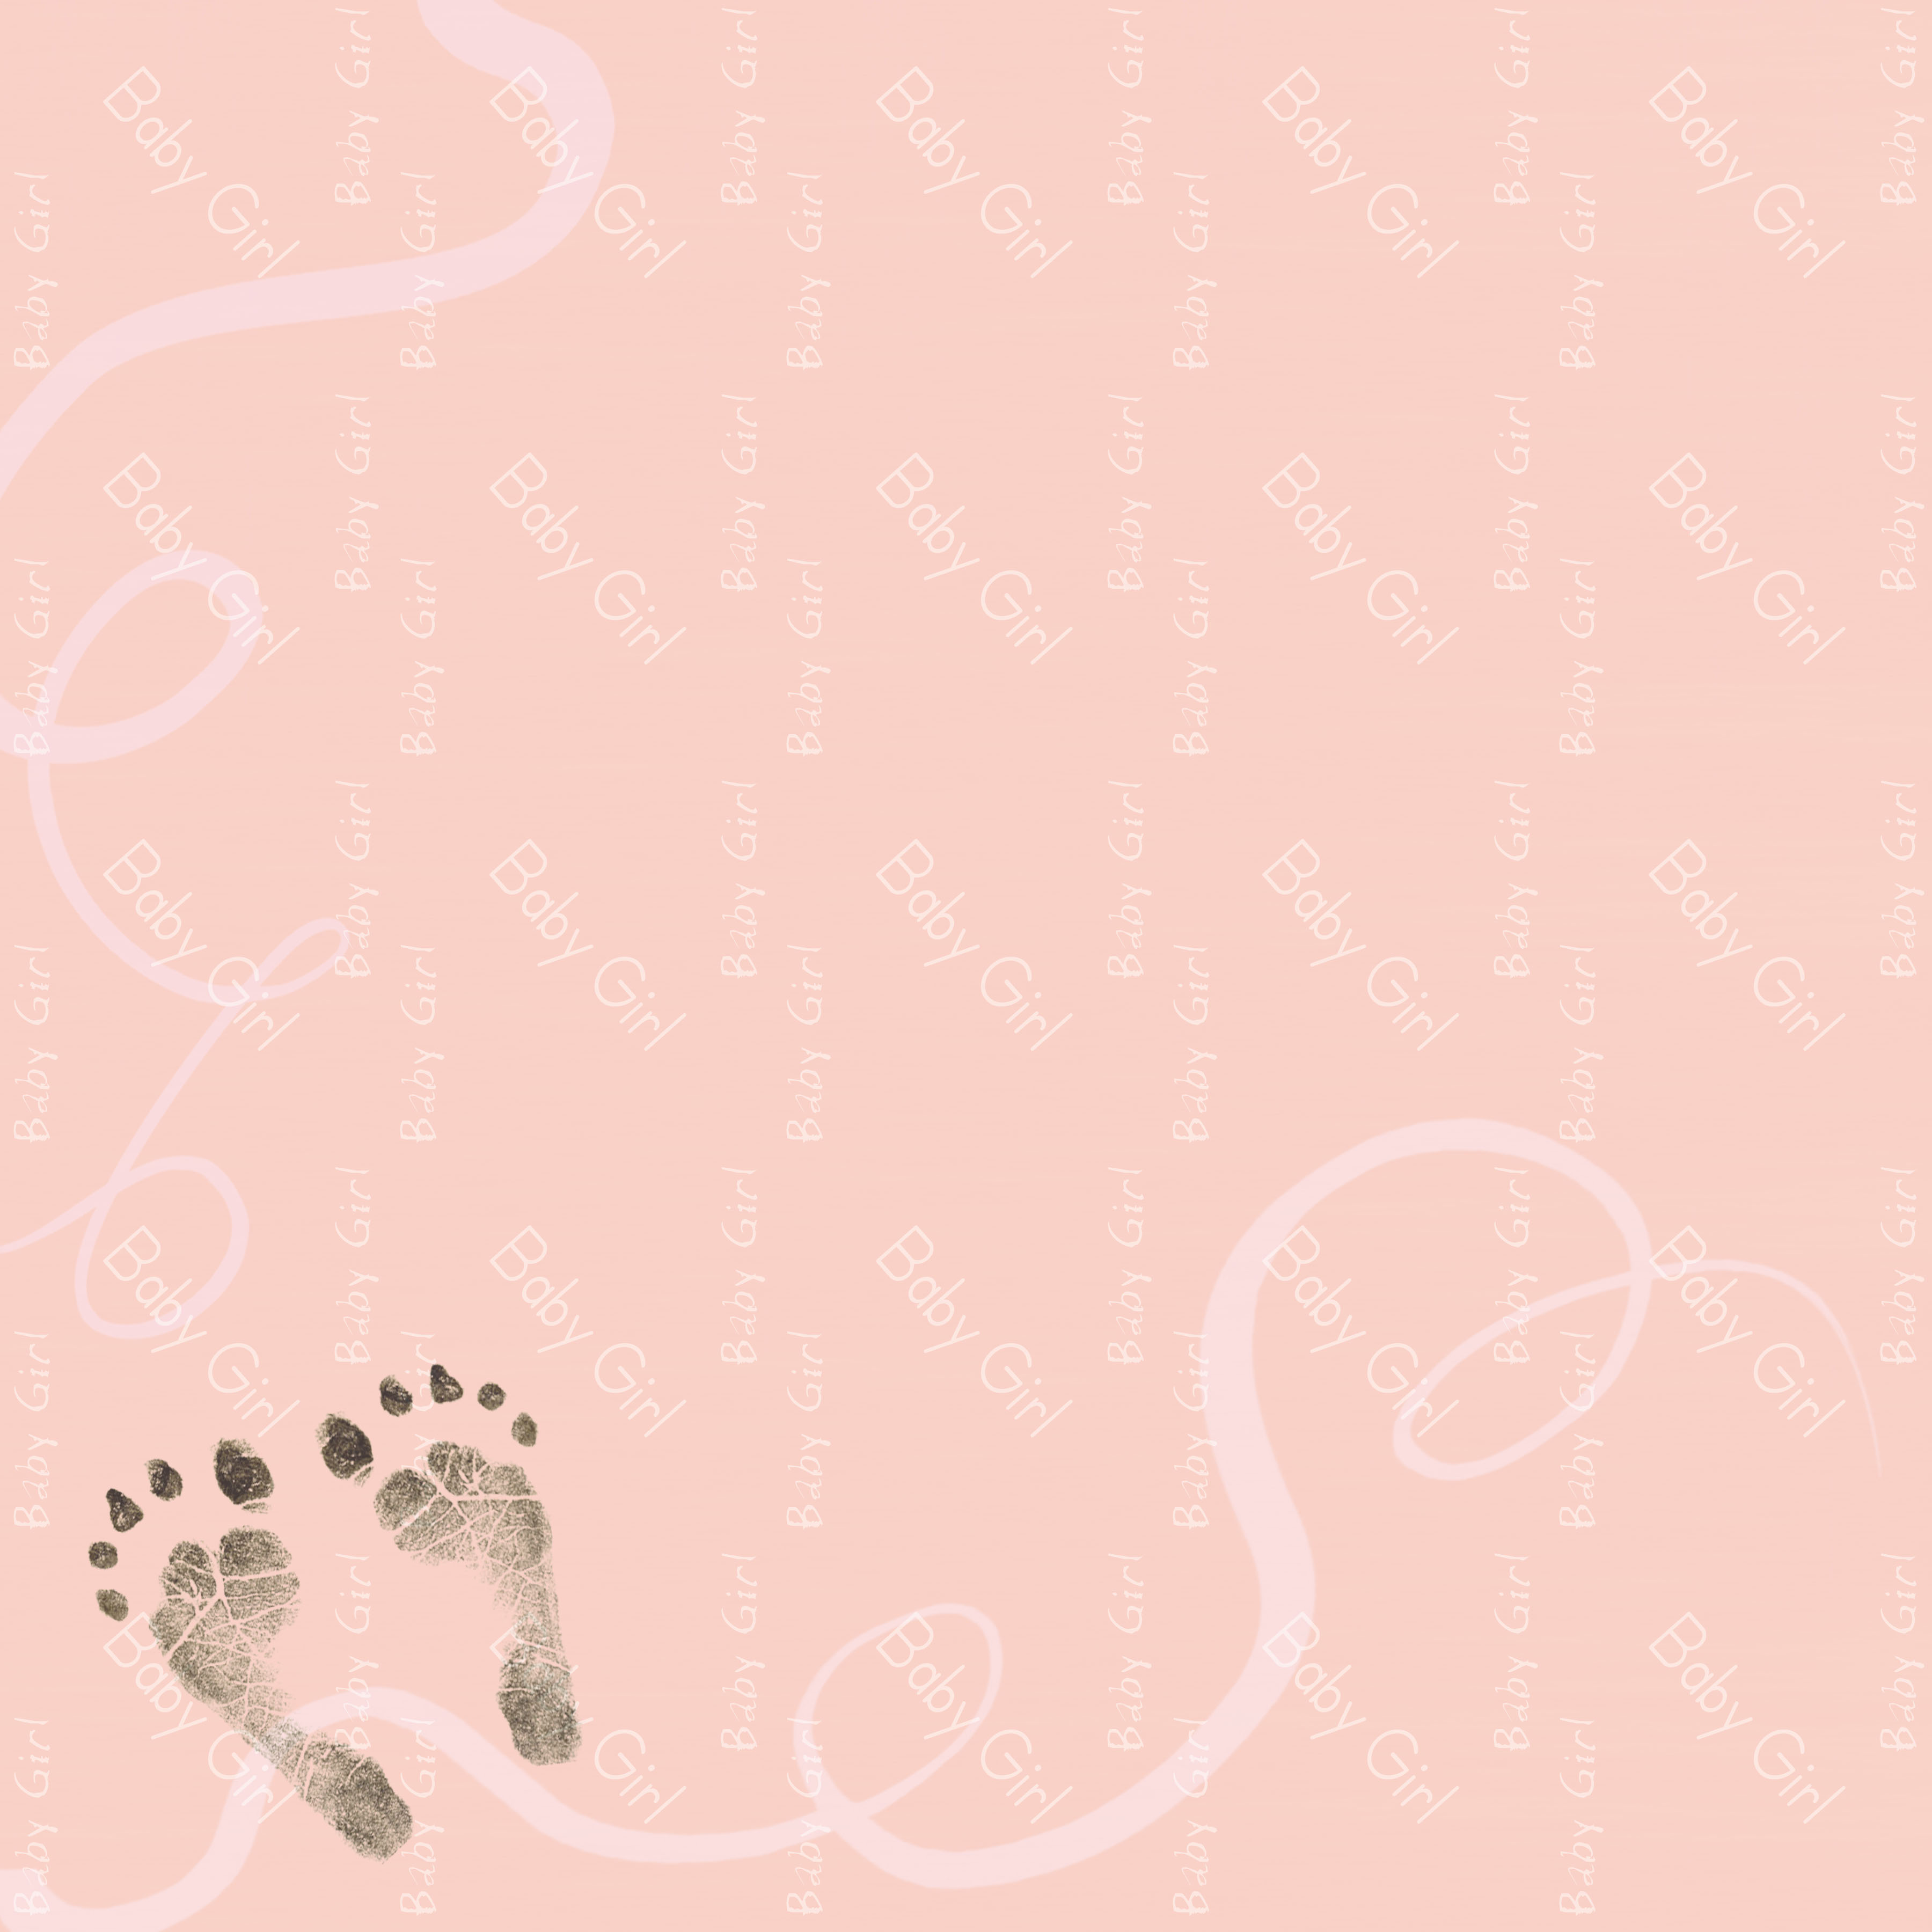 Backgrounds For Baby Pictures